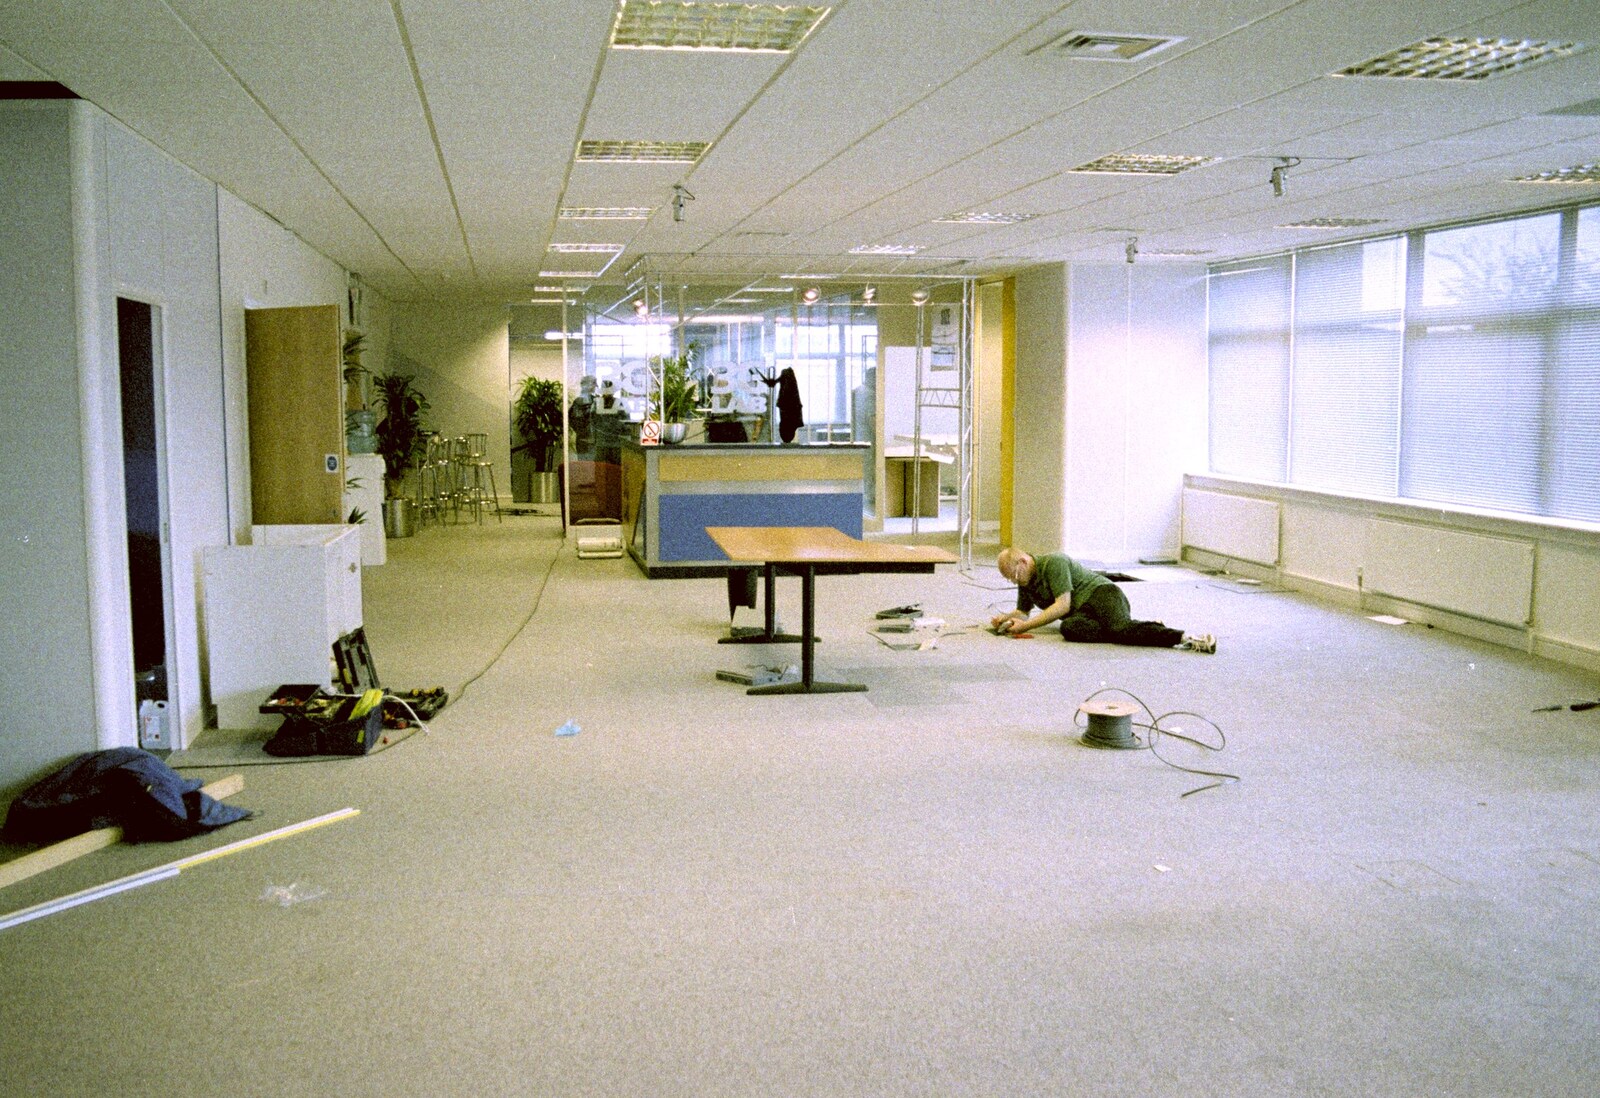 The new Matrix House office is set up from 3G Lab Moves Offices, Milton Road, Cambourne and Cambridge - 27th August 2001